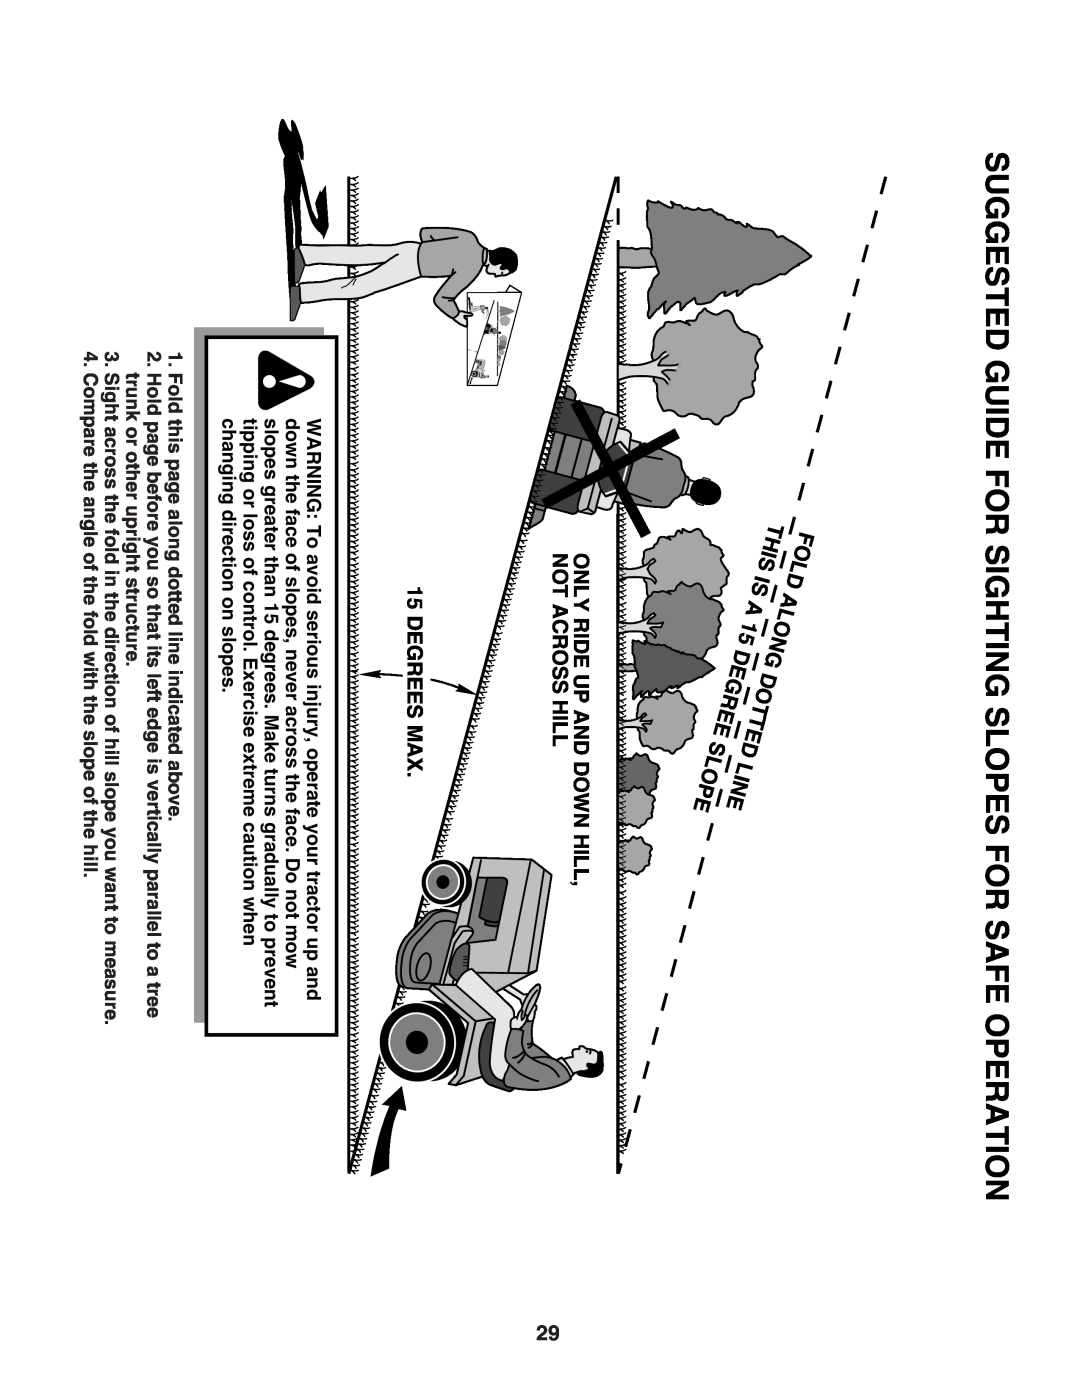 Poulan 405327 manual Suggested Guide For Sighting Slopes For Safe Operation 